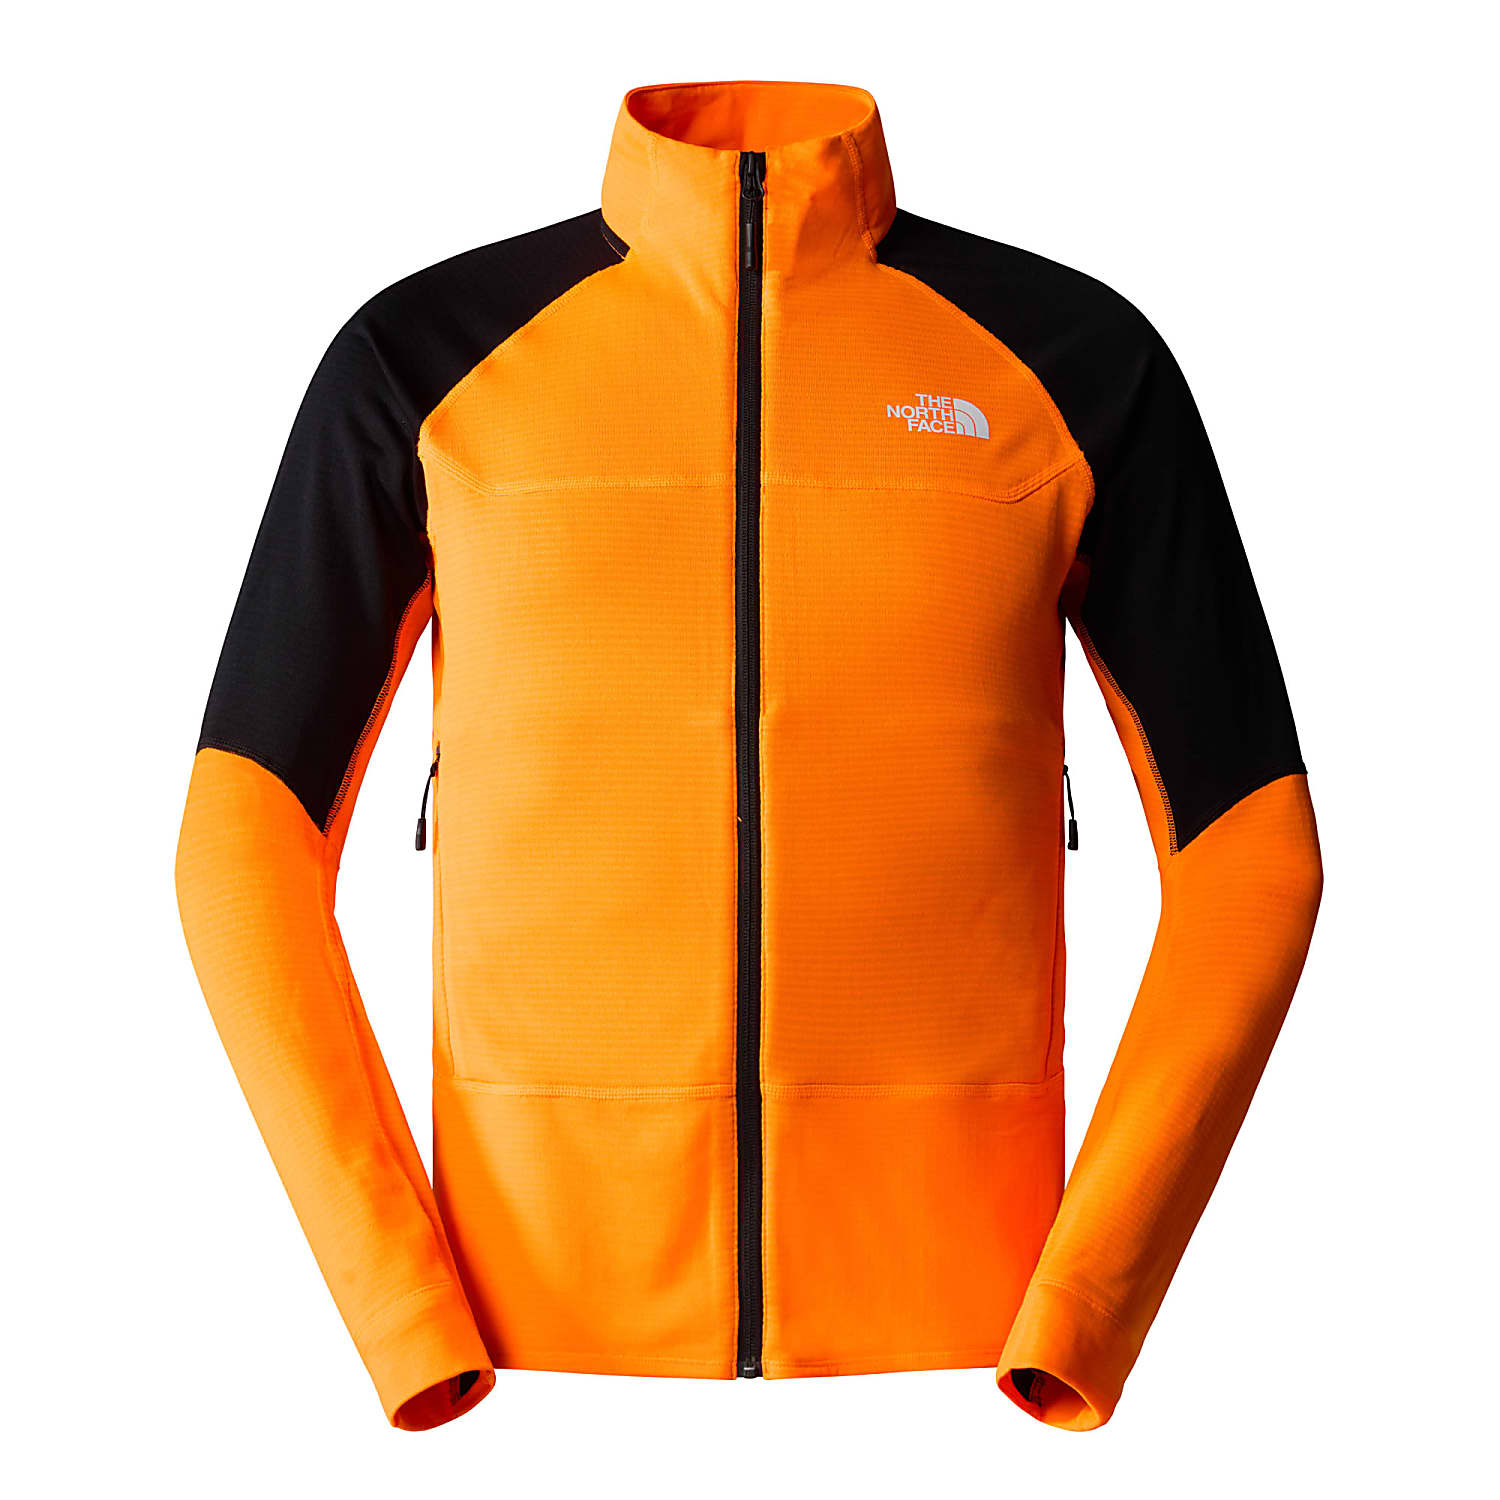 The North Face M BOLT - and Black TNF - shipping cheap JACKET, Orange Fast POLARTEC Shocking